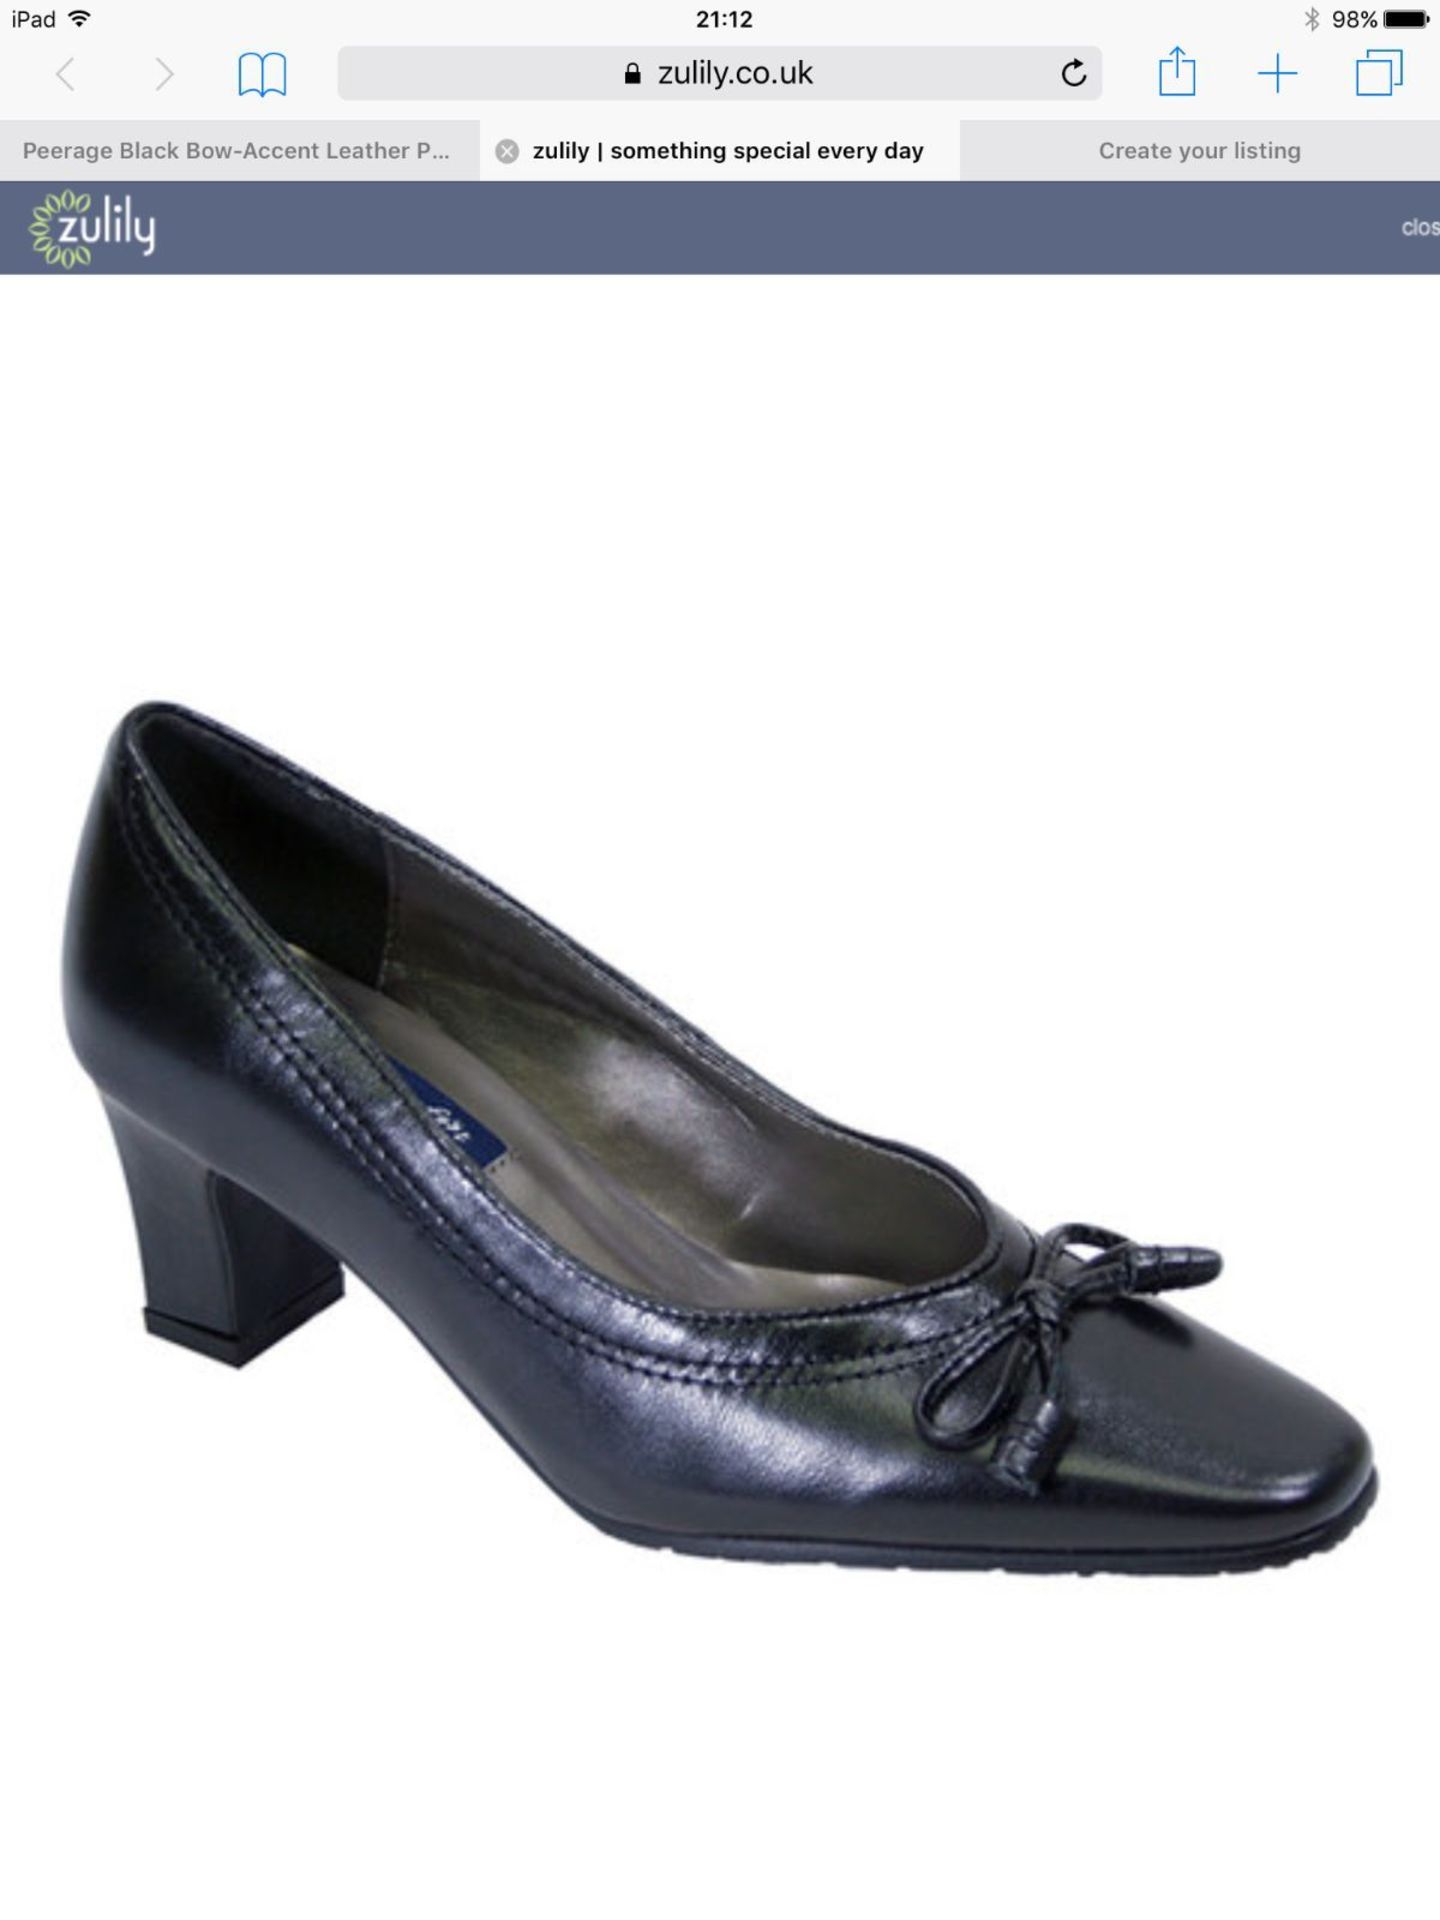 Peerage Black Bow-Accent Leather Shoe, Size Eur 43 WW (New with box)